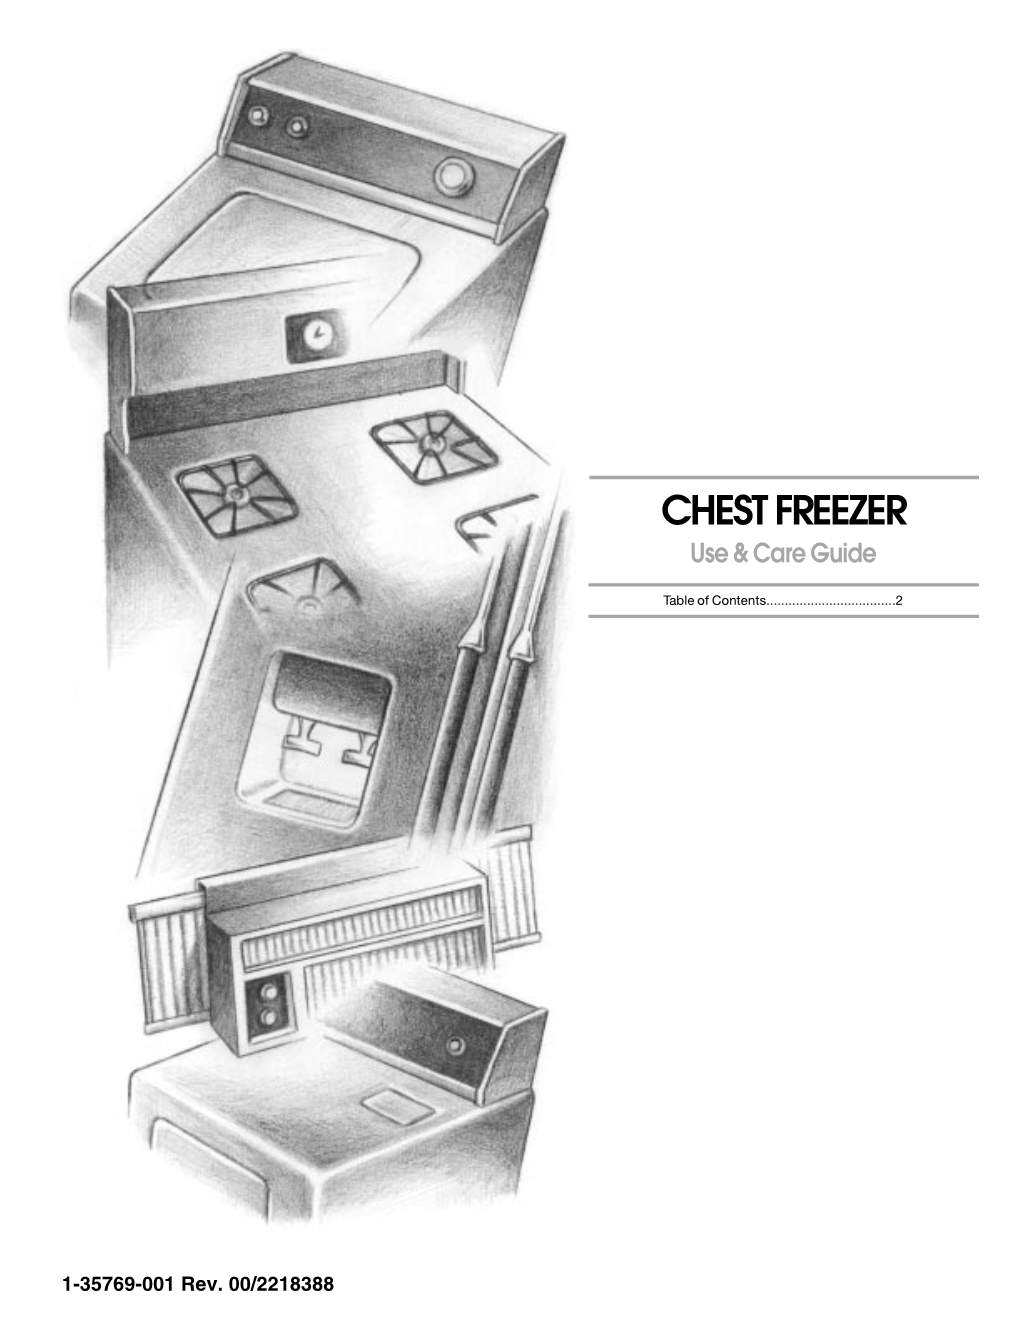 CHEST FREEZER Use & Care Guide